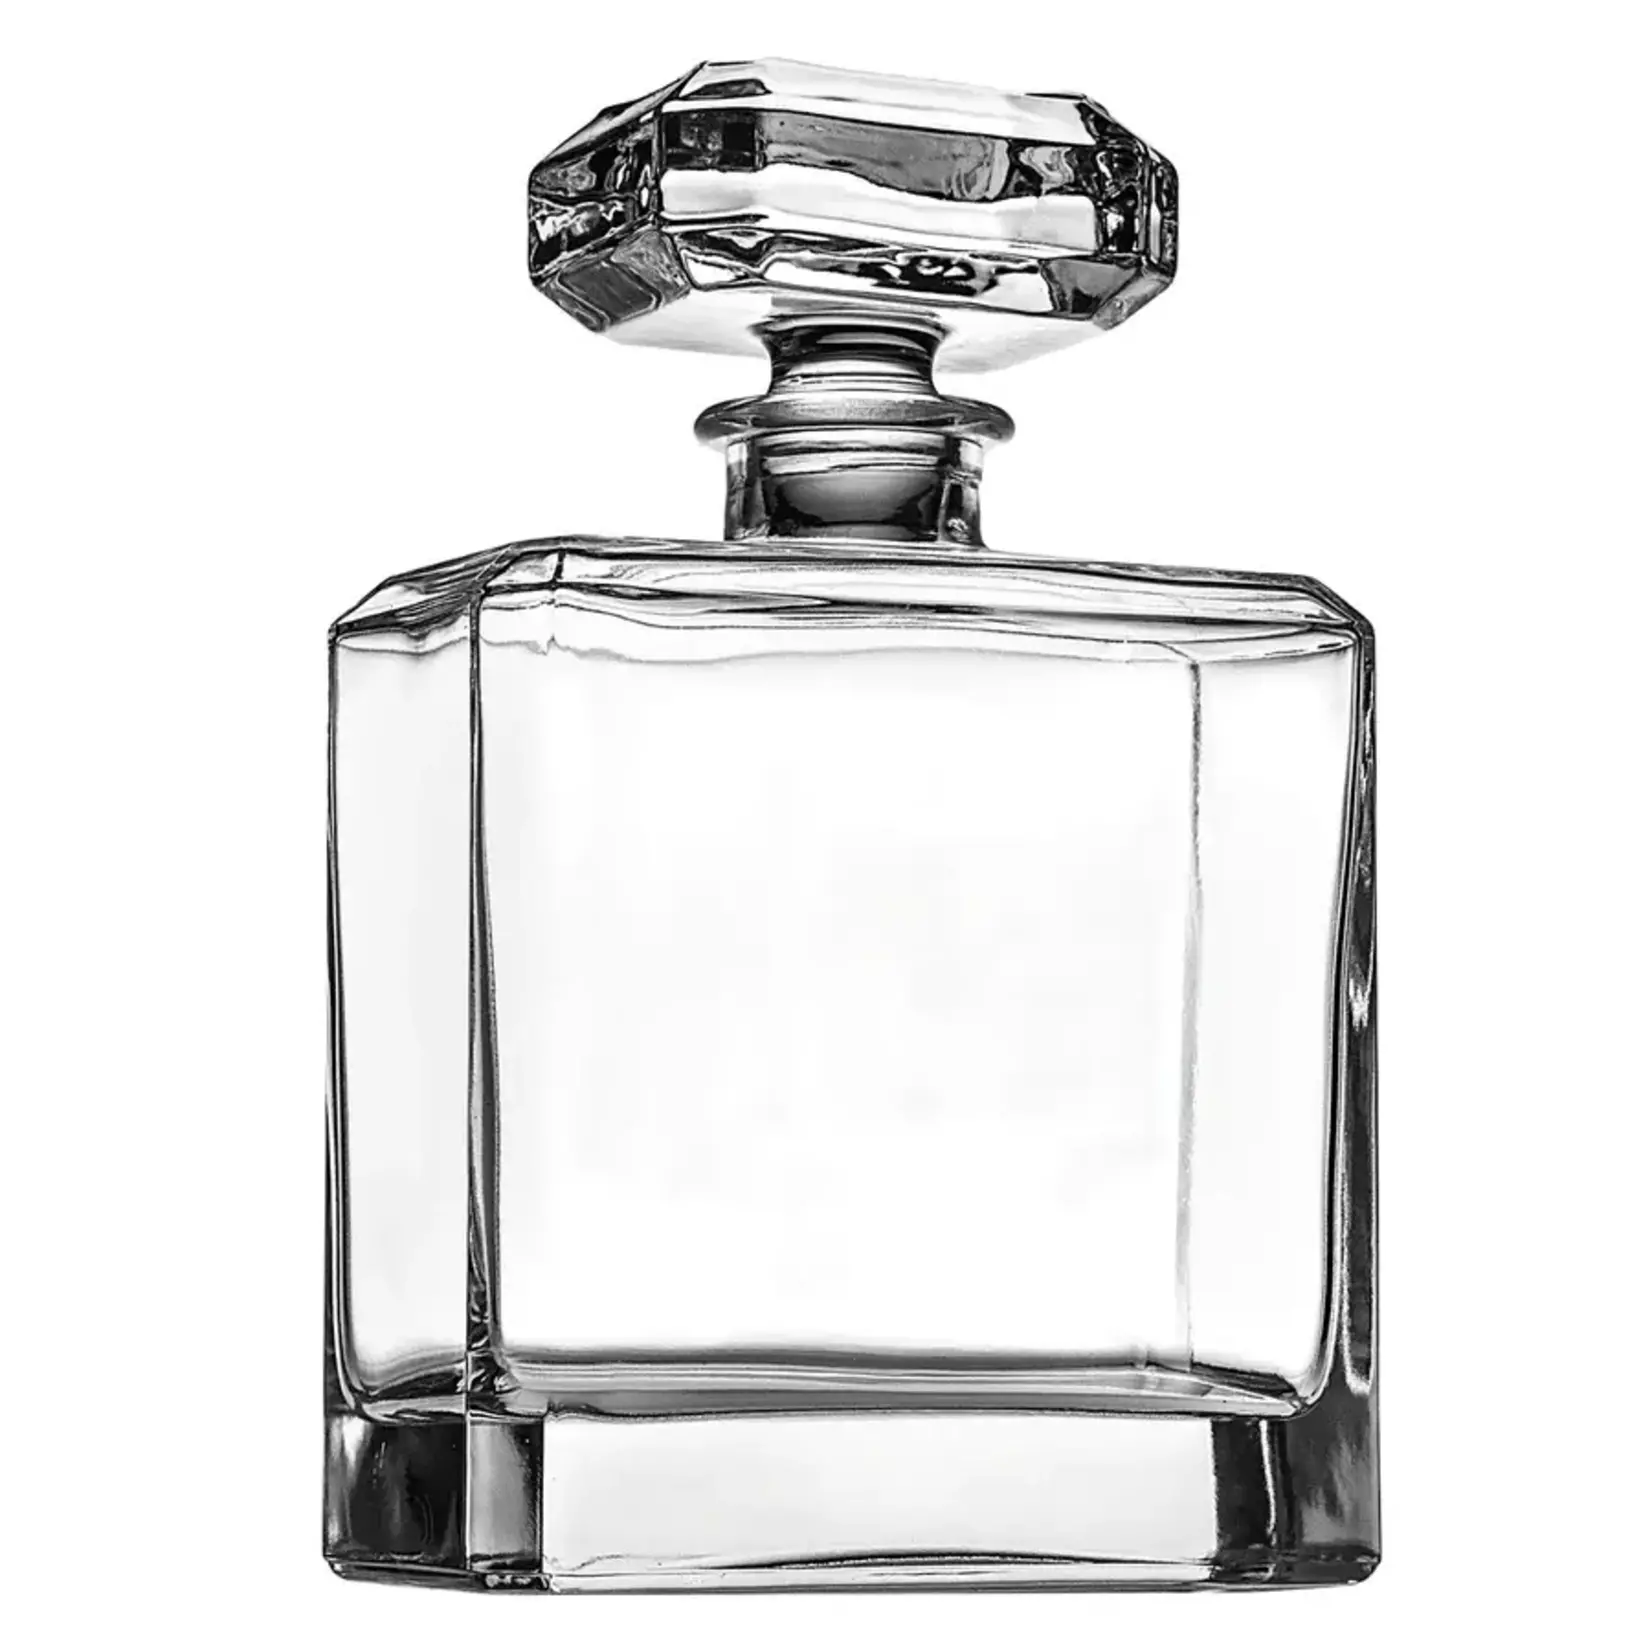 Chateau Decanter